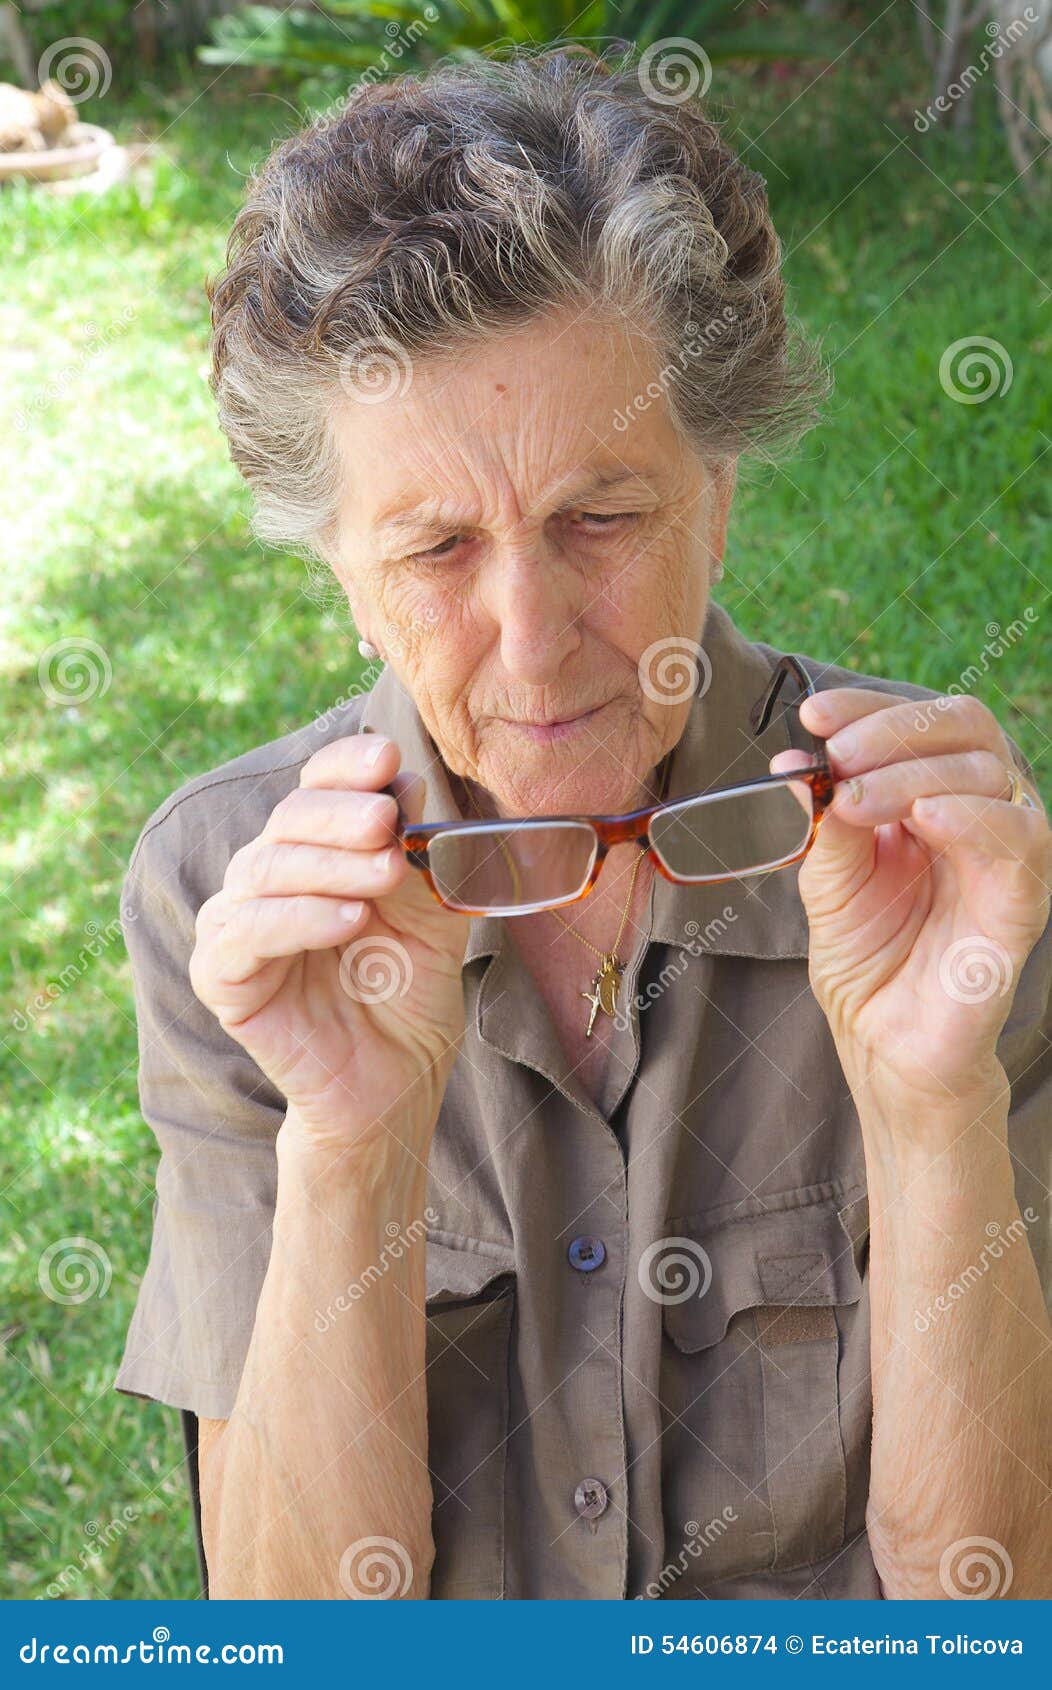 An Old Woman Looks At Her Eye Glasses Stock Photo - Image ...